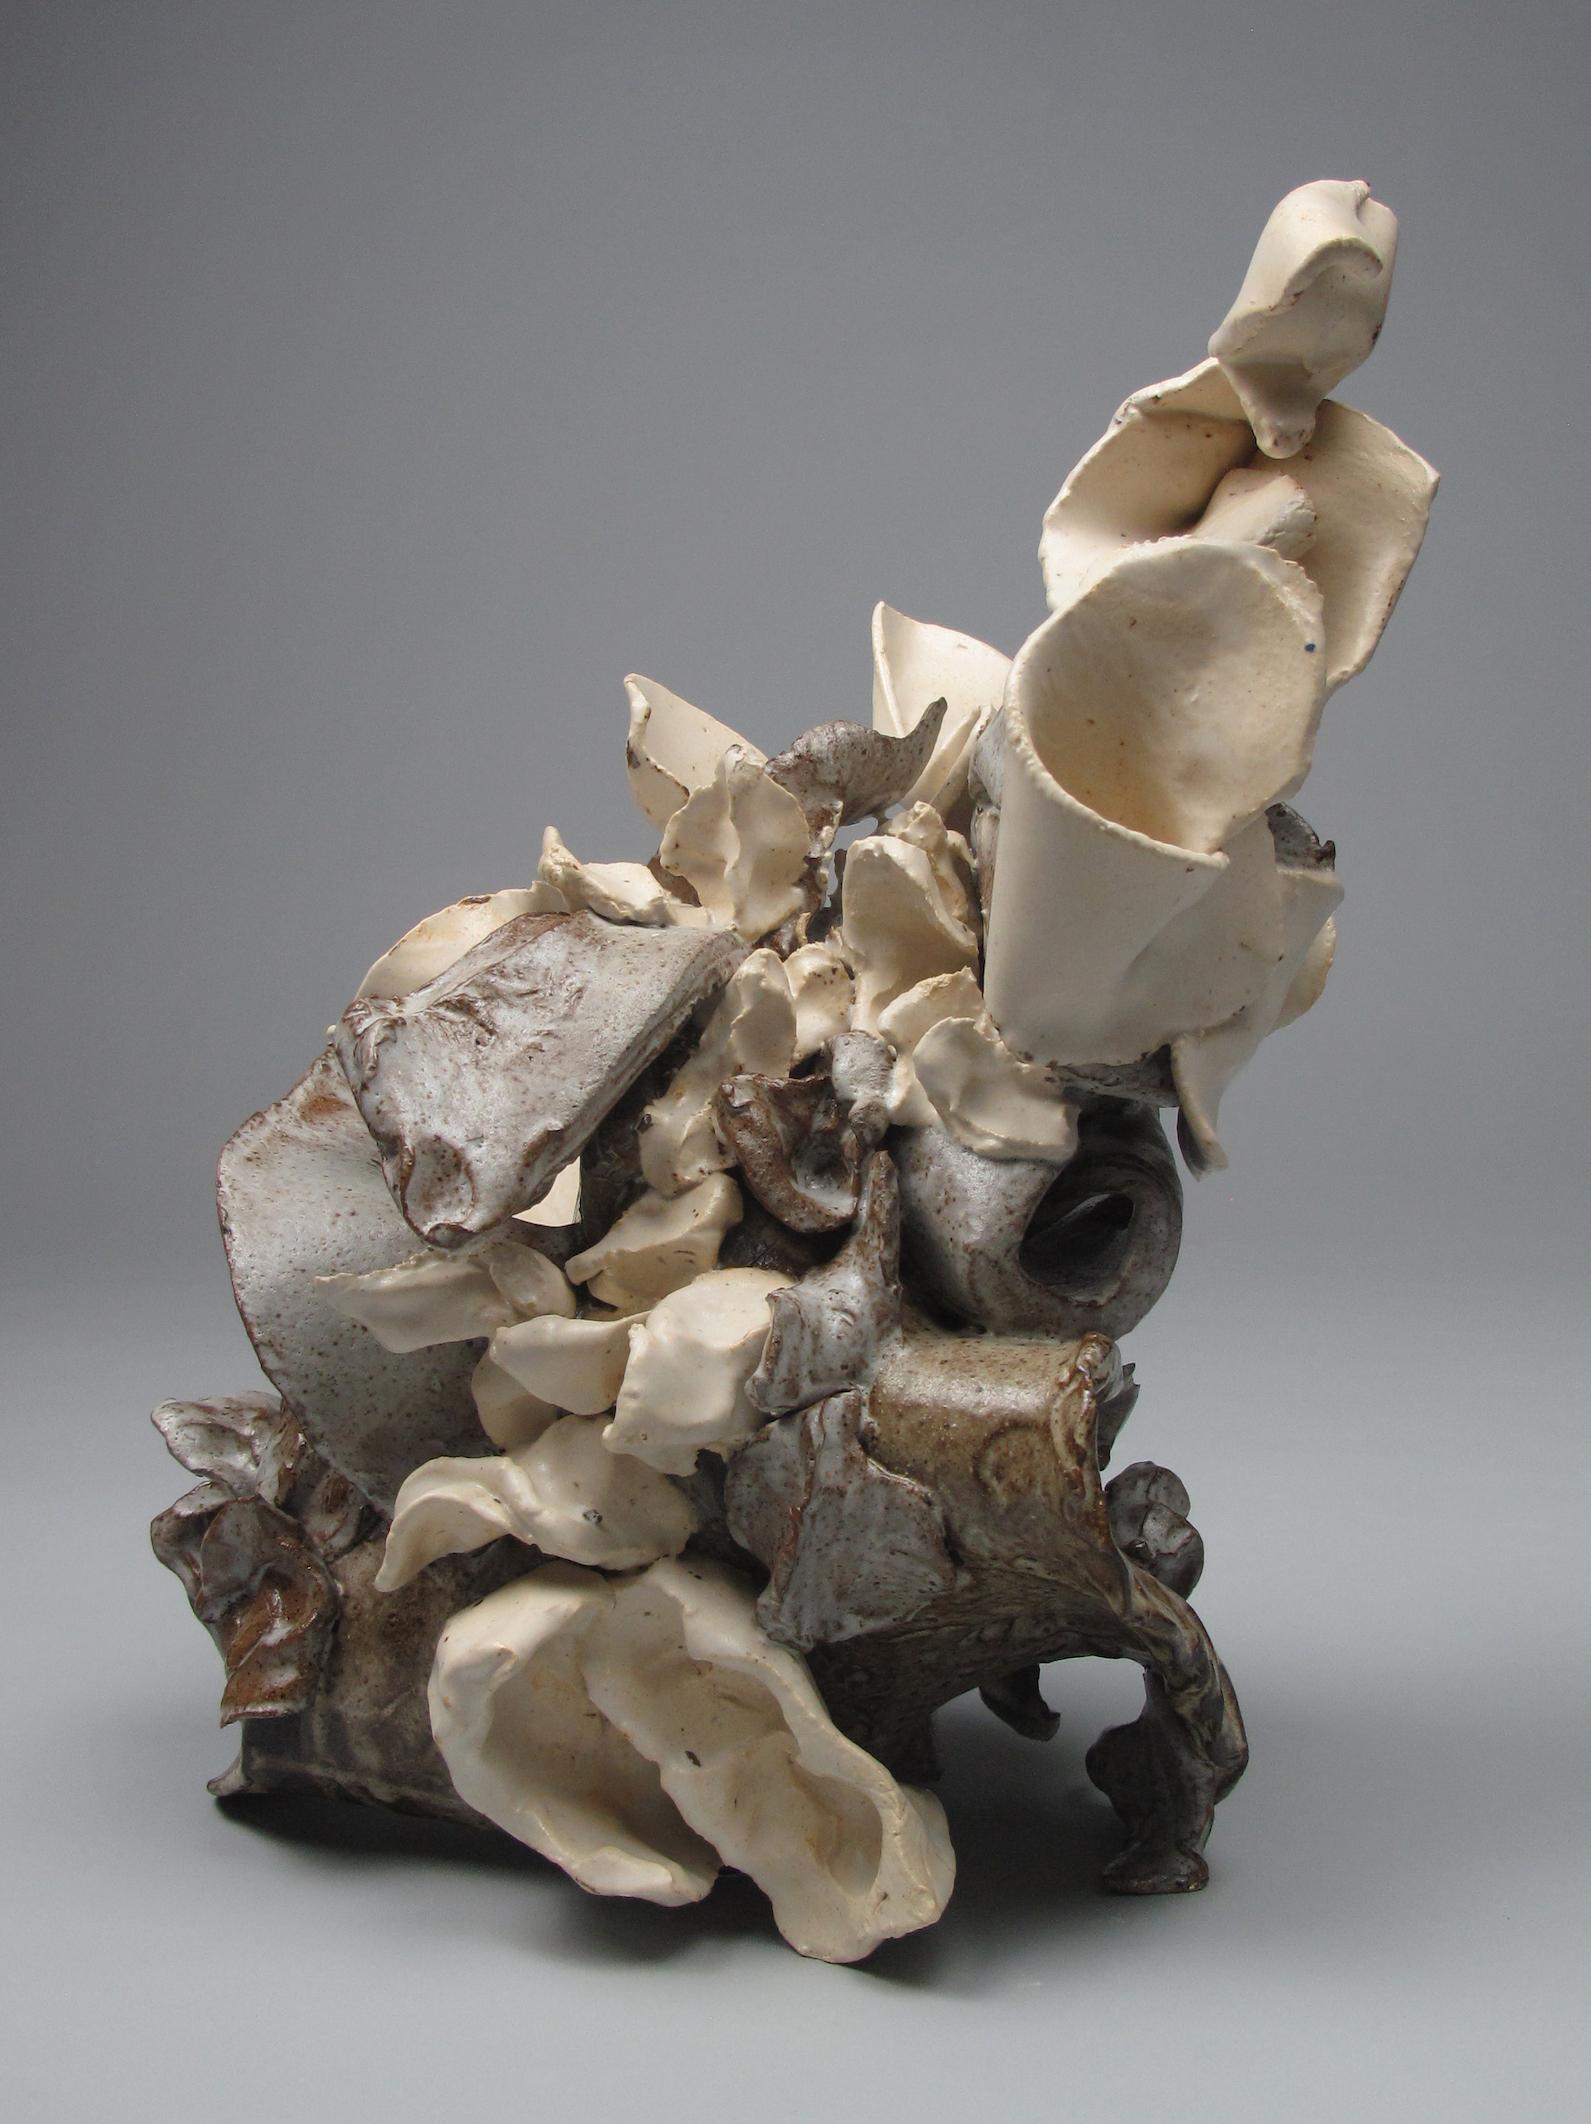 Sara Fine-Wilsons ”Milky Jumble” is a gestural 12.5 x 10 x 8 inch ceramic sculpture in shades of brown, white and cream. In this powerful and evocative sculpture individual slab and pinched elements formed from multiple clay body types are assembled